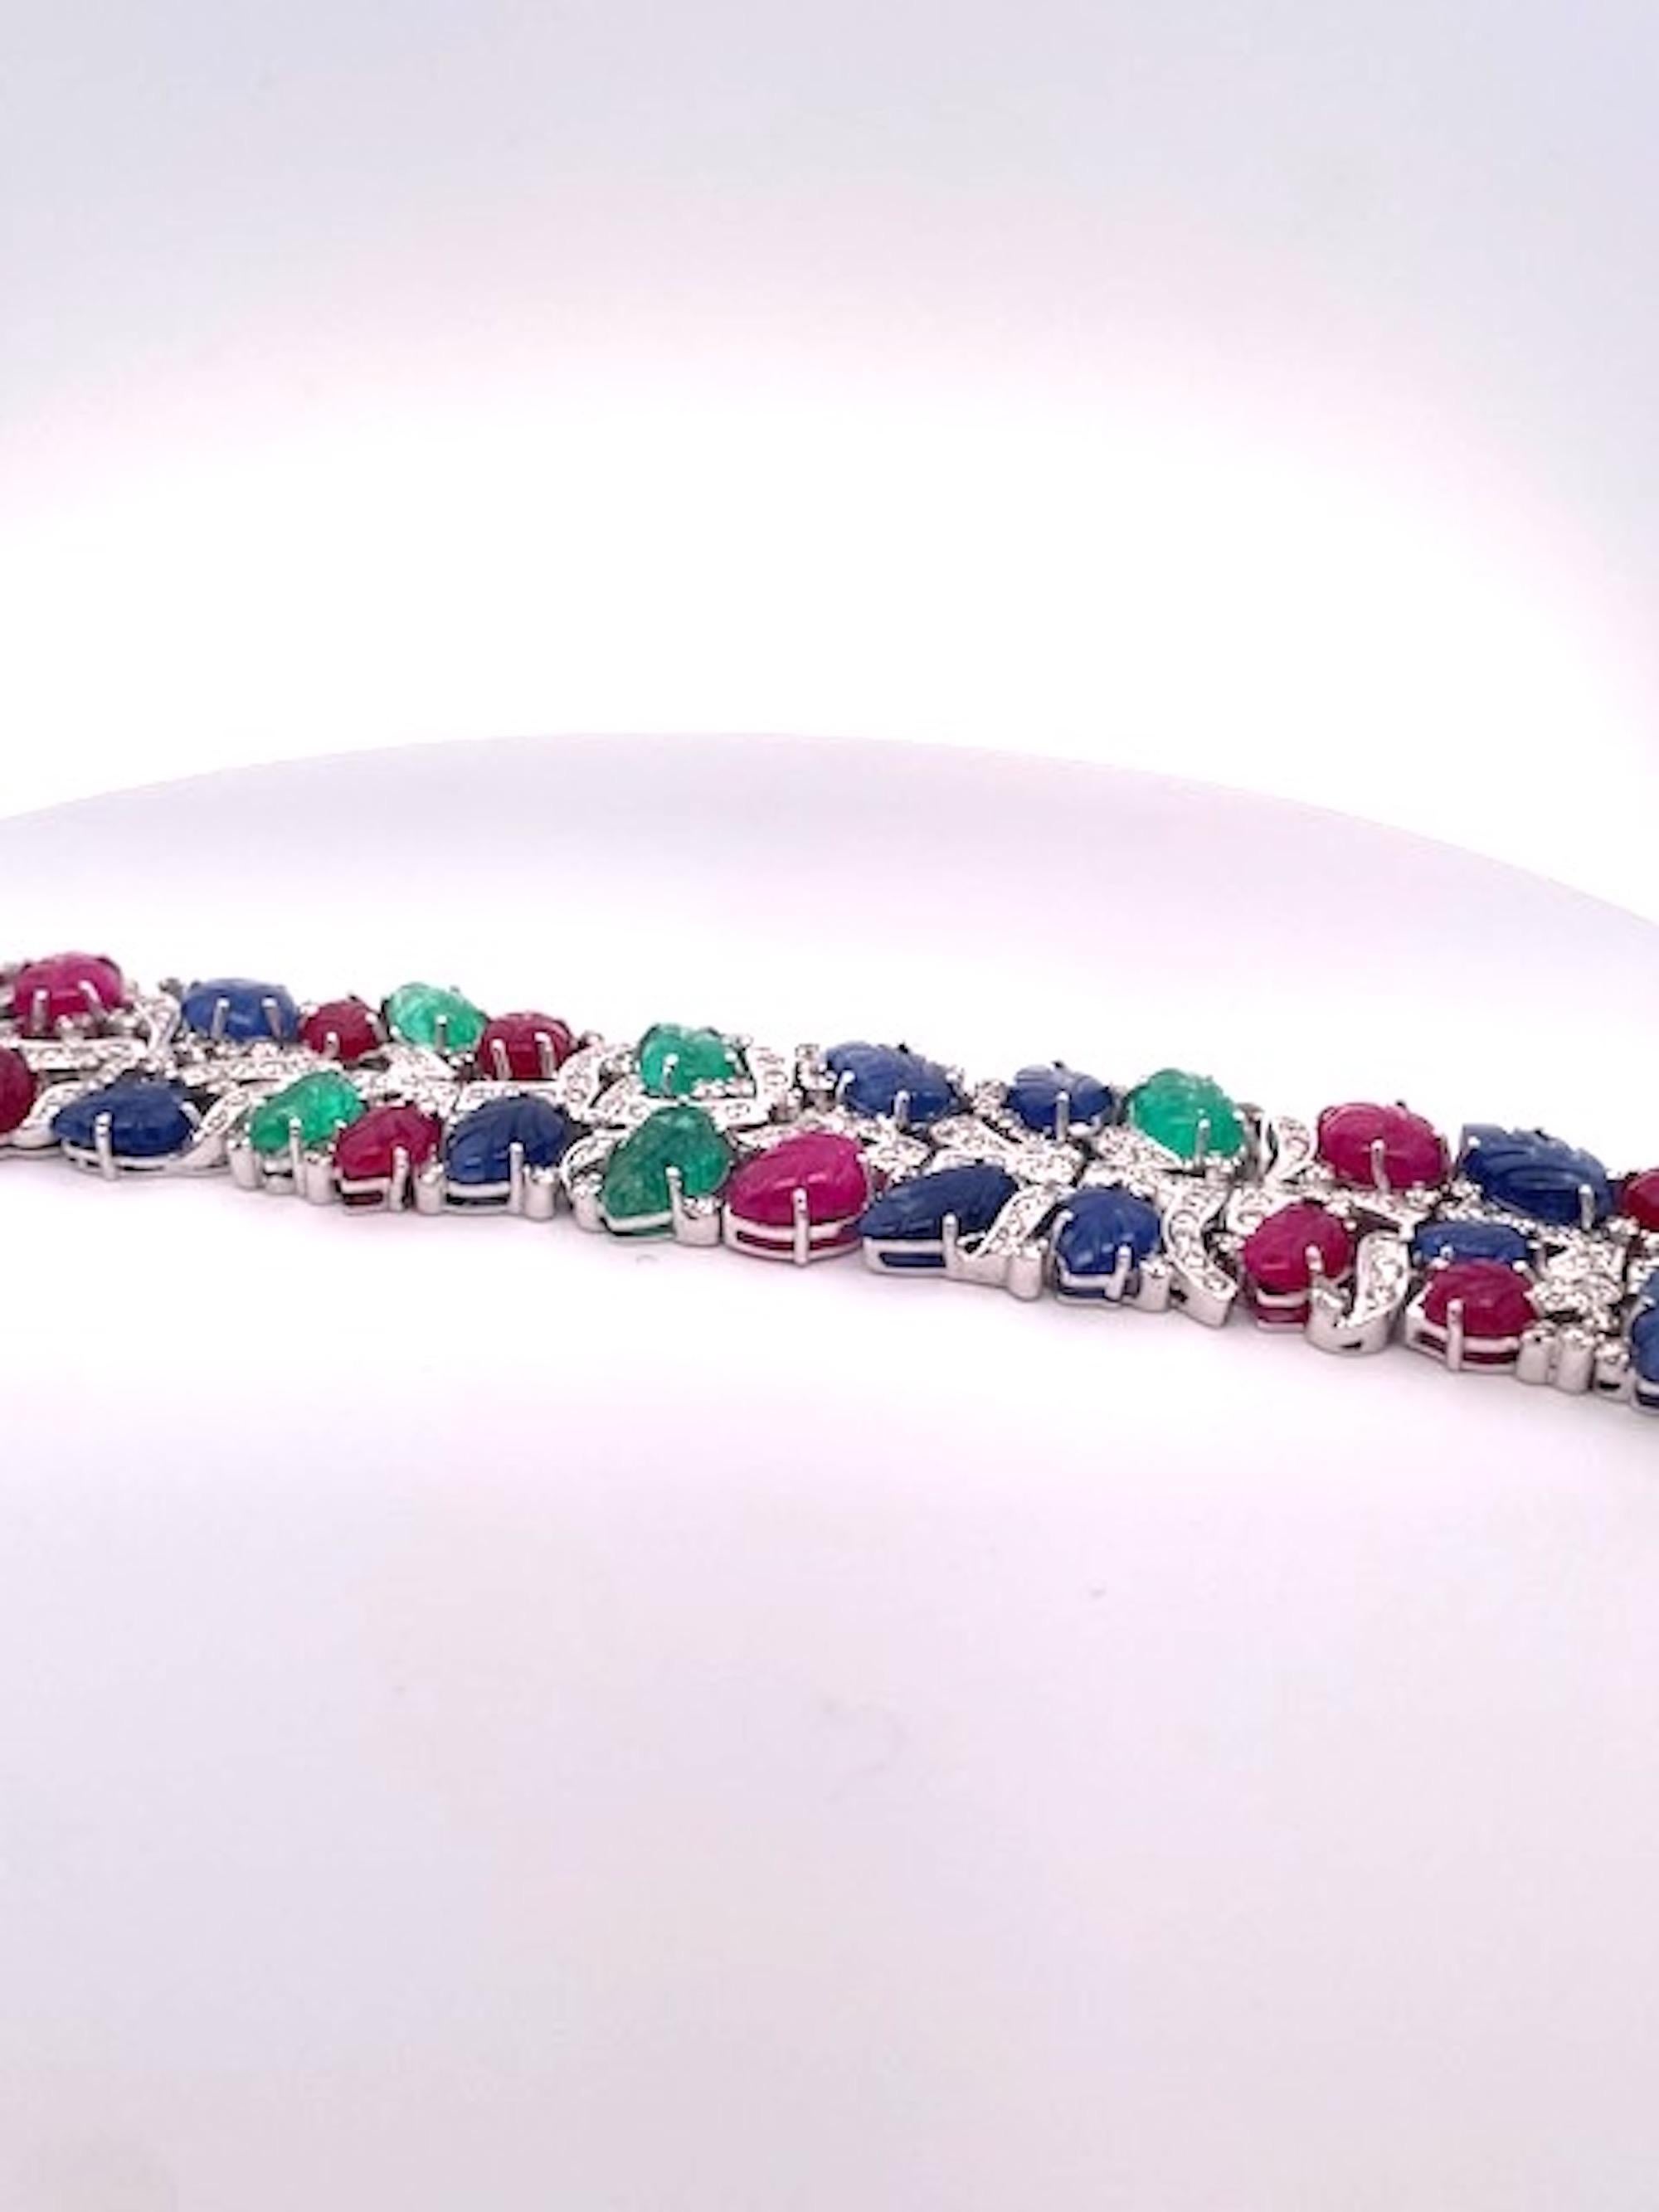 This Tutti Frutti Bracelet has all the bells and whistles it is gorgeous and amazing.  This bracelet weighs over 82.3 grams is 18K gold made in Italy.  This bracelet is 7.5 inches long and 1